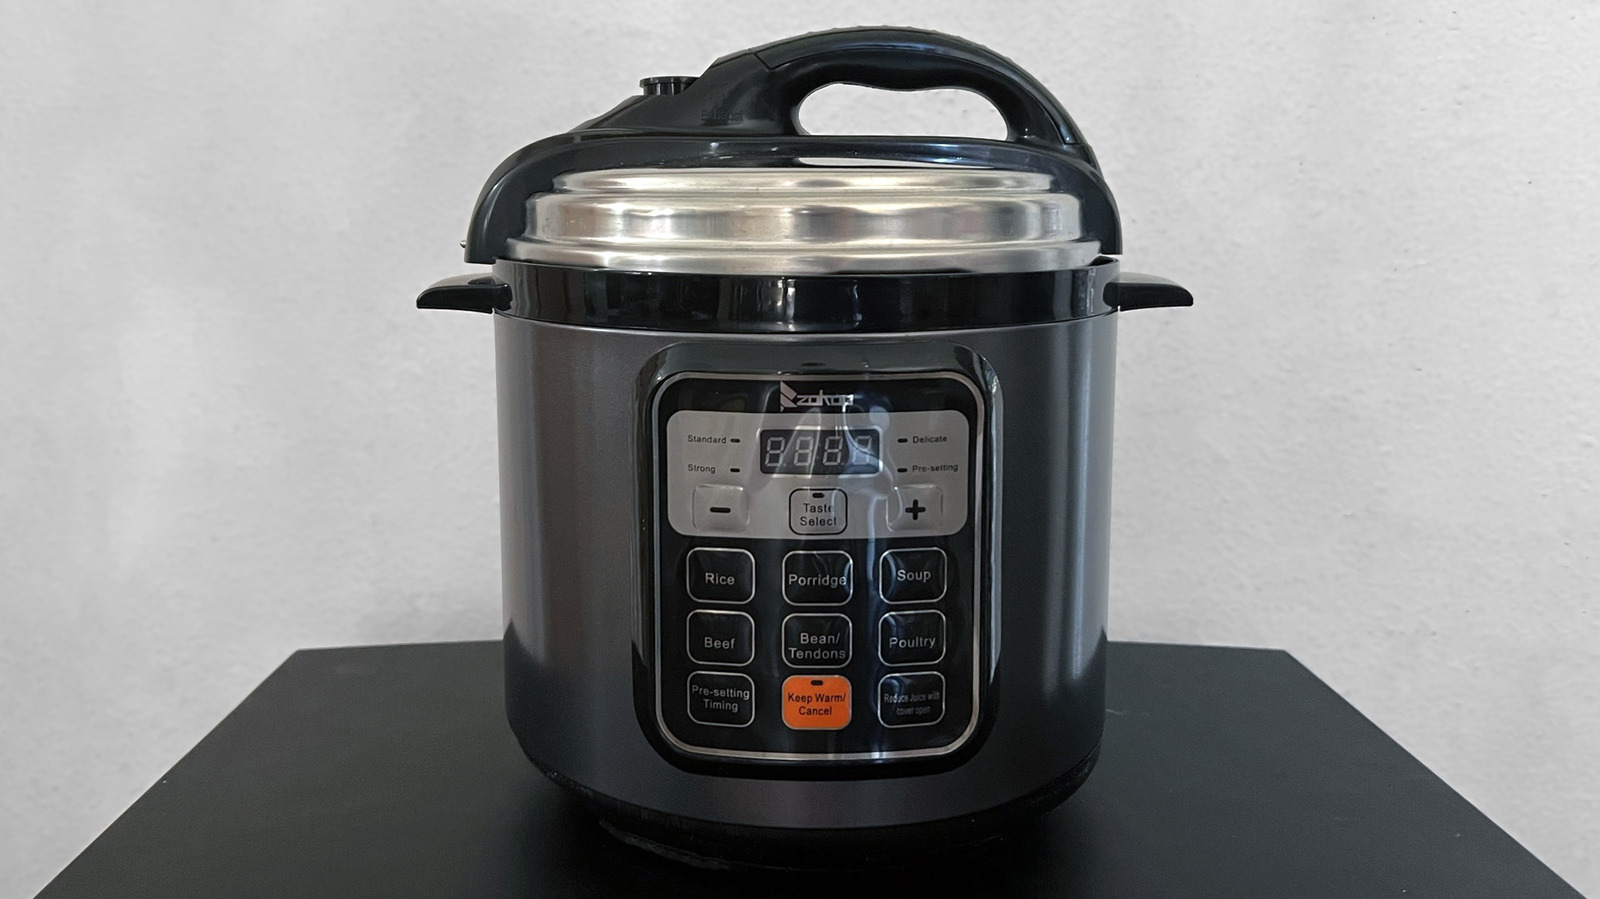 This On-Sale Pressure Cooker Is An Affordable Alternative To The Instant Pot